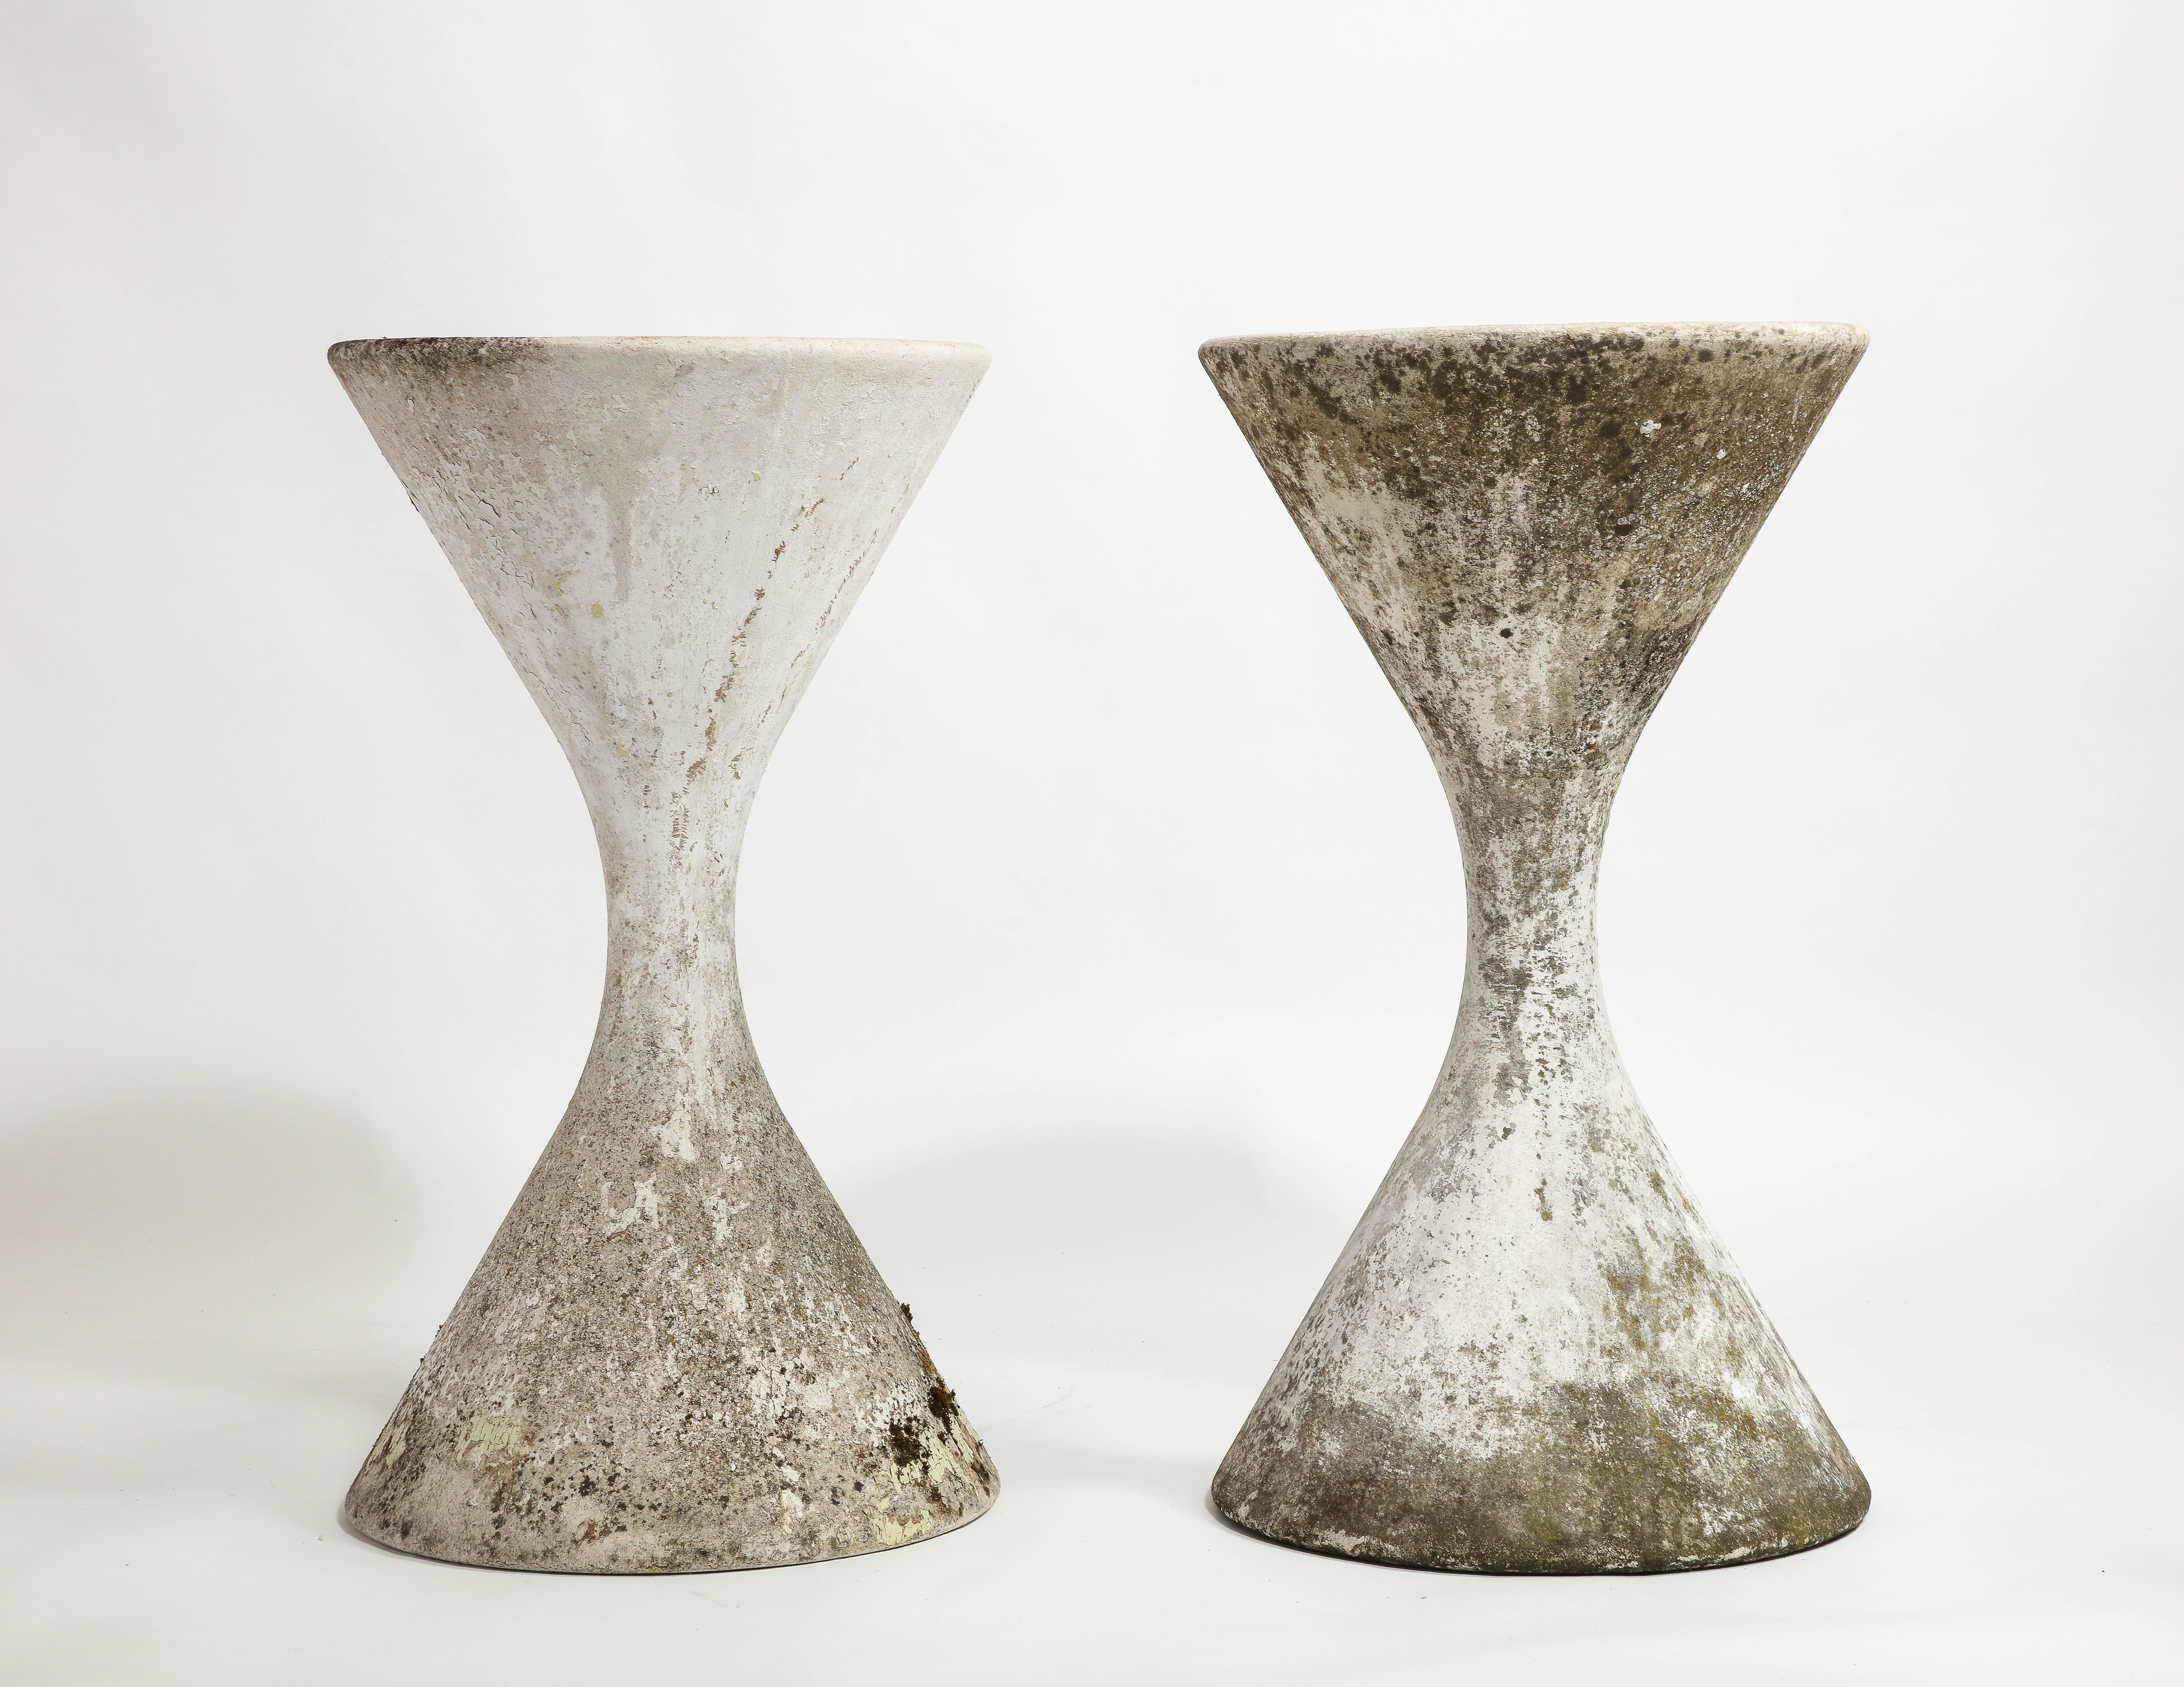 Willy Guhl for Eternit Large Concrete Diabolo Spindel Planters, 1960s In Good Condition For Sale In New York, NY